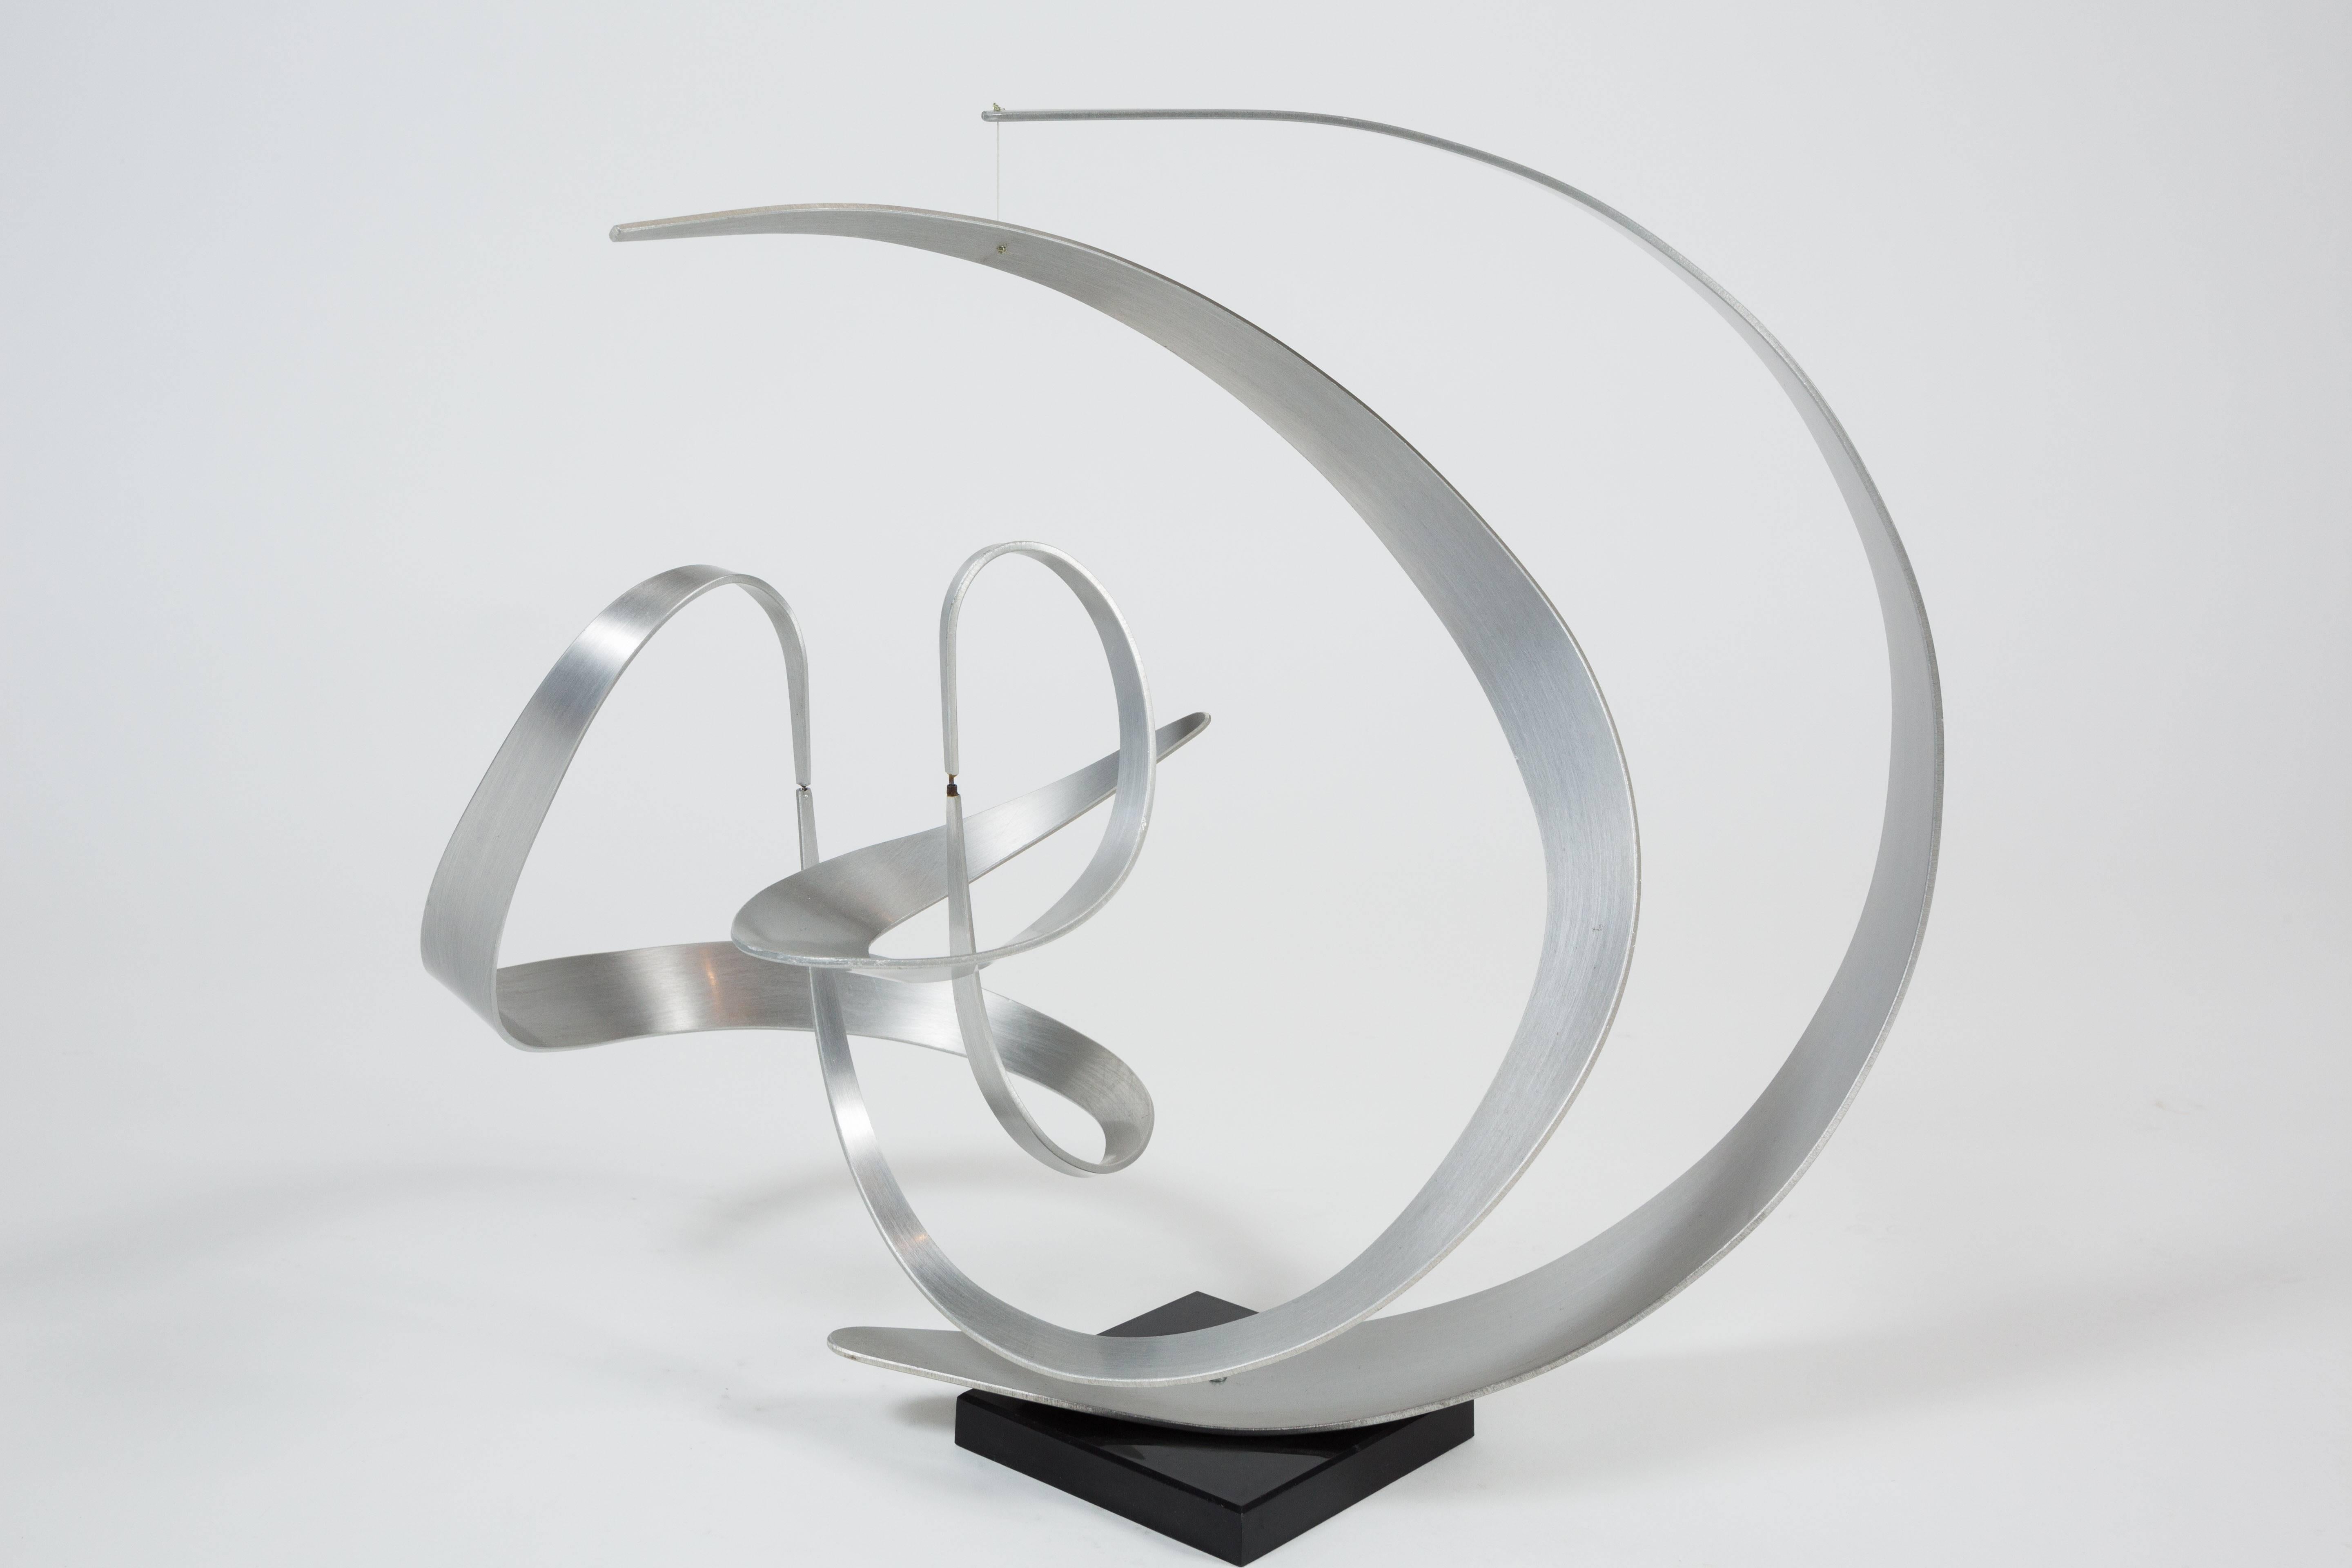 Brushed Striking Kinetic Abstract Sculpture by John W. Anderson